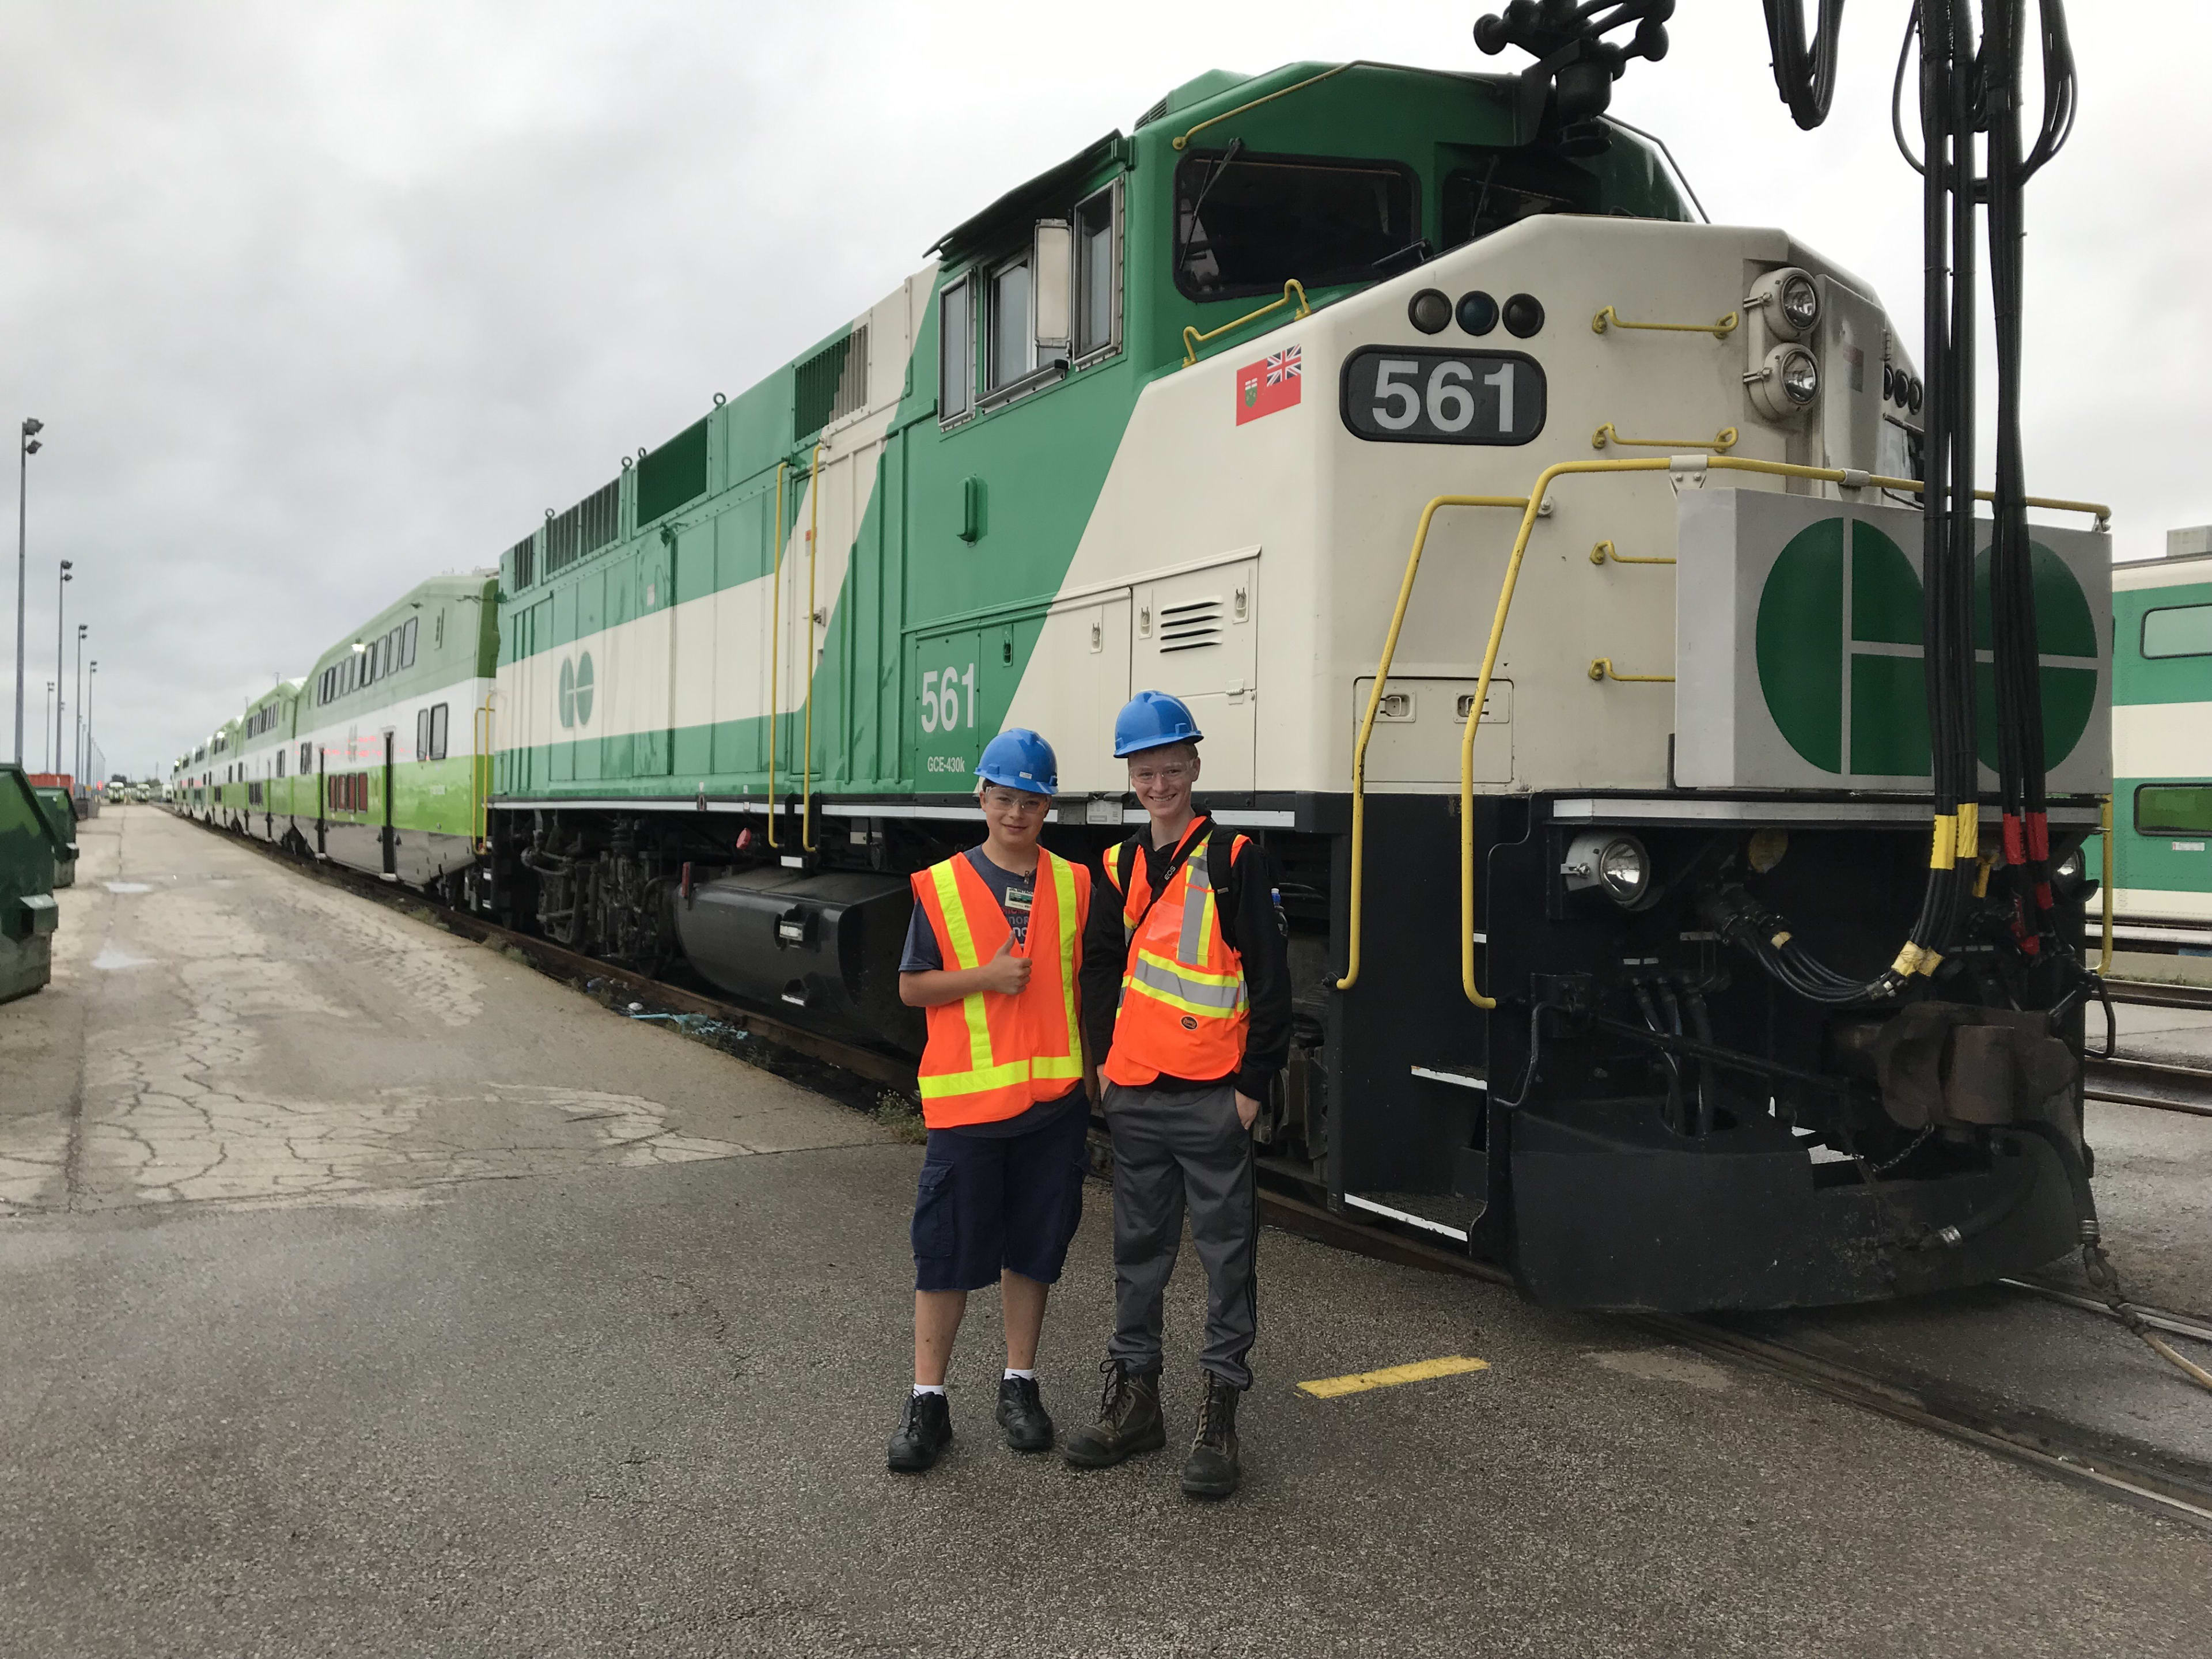 The two teens stand next to a large GO train while on a recent visit to the Wilowbrook facility.